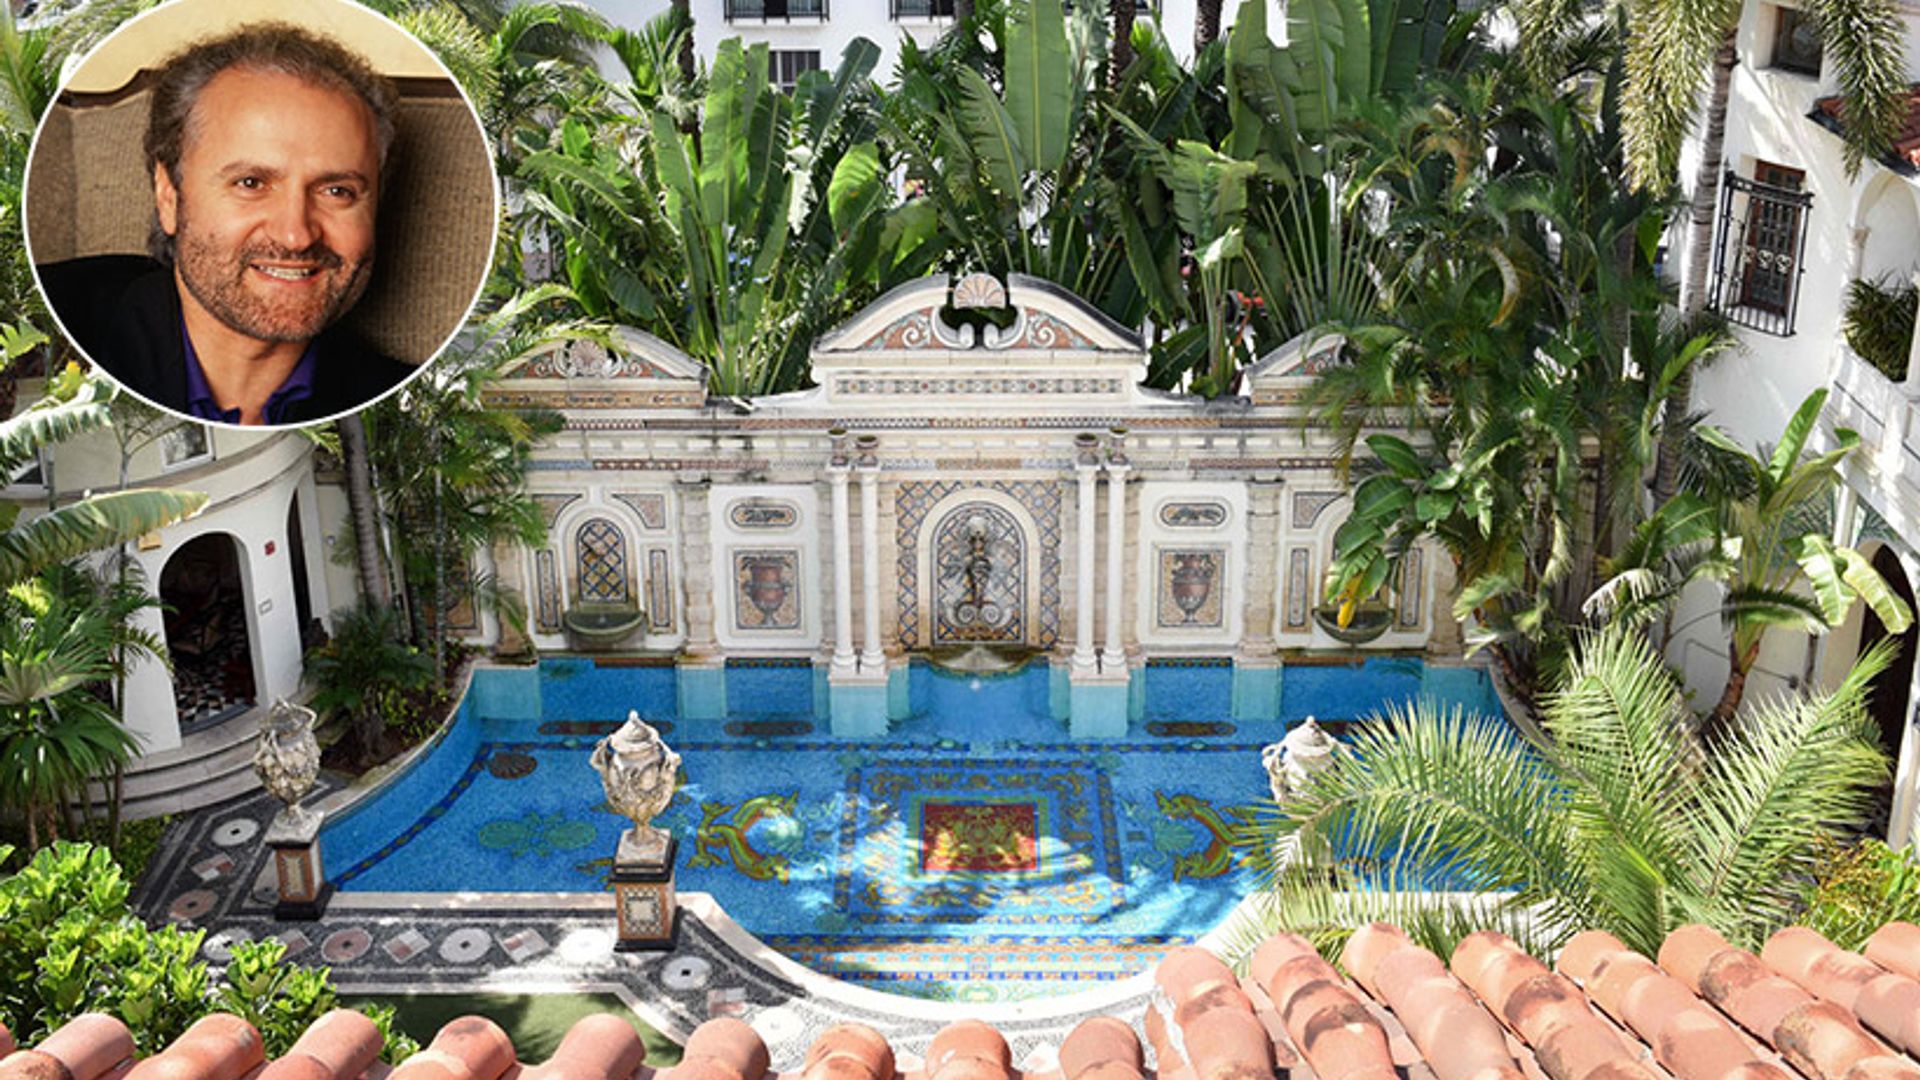 You could stay at Versace's former Miami mansion – find out how